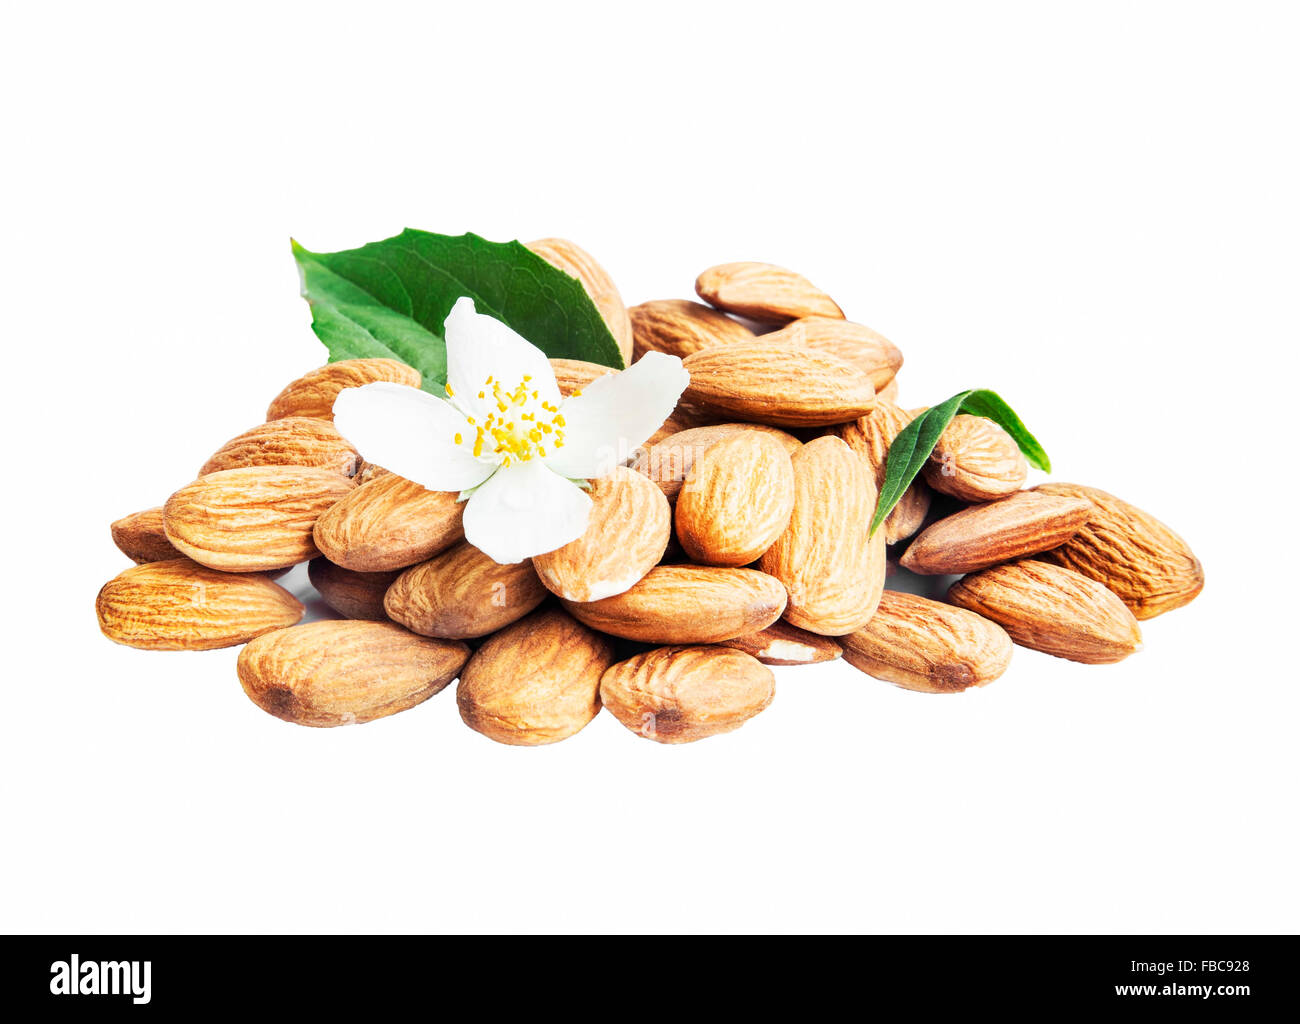 Almonds Nuts Isolated with Flower and Leaf Stock Photo